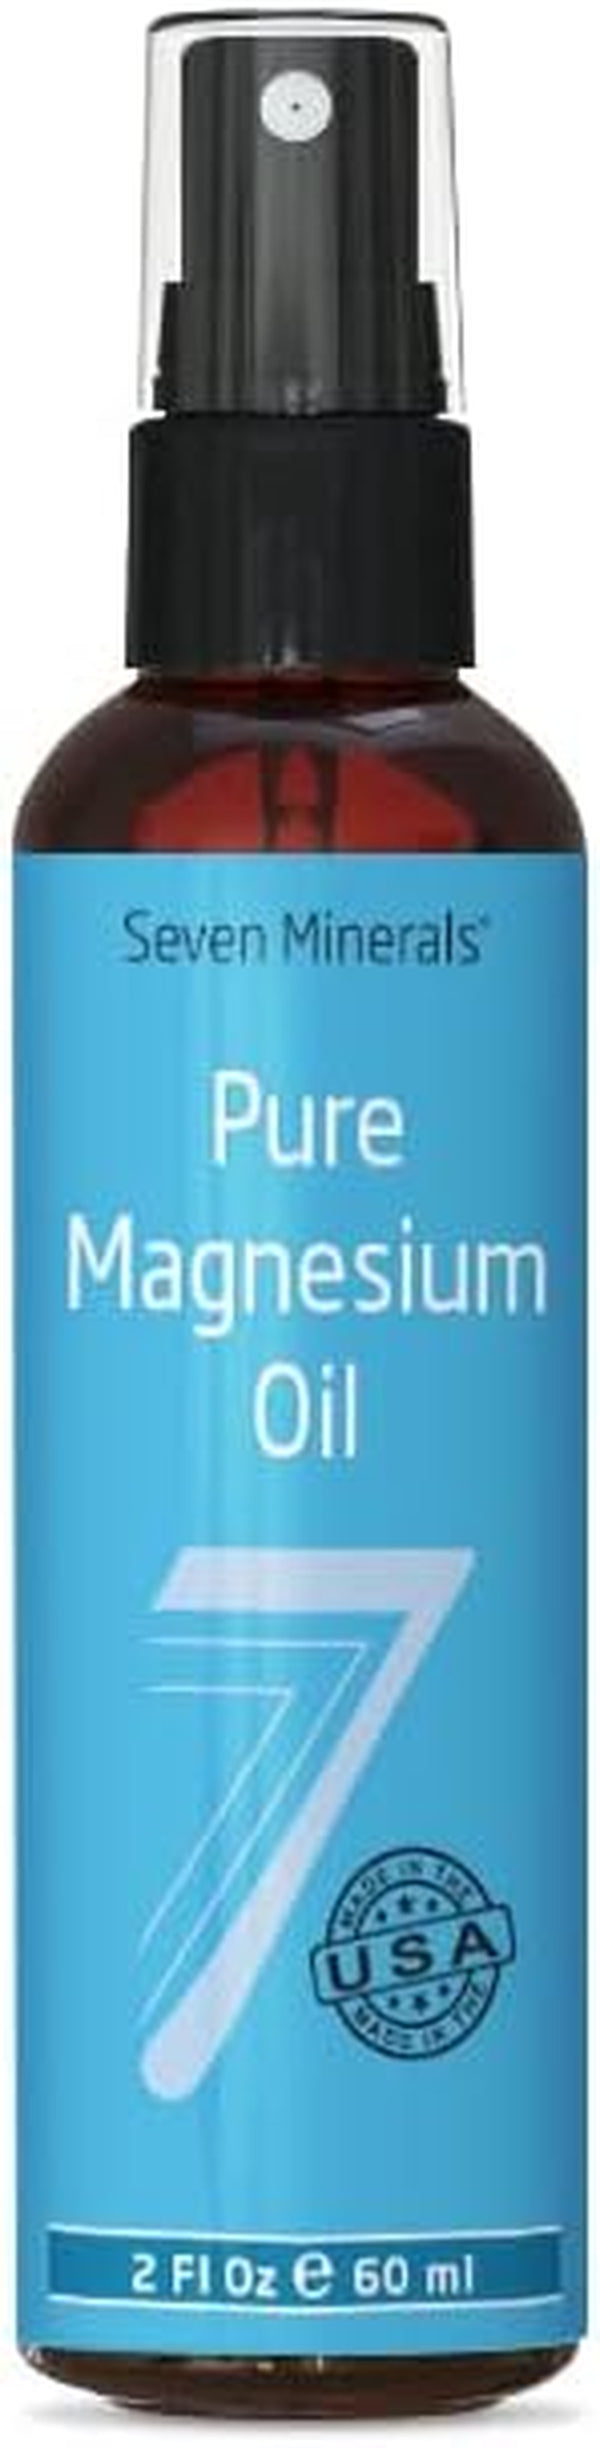 Seven Minerals, Travel Size Pure Magnesium Oil Spray - USP Grade Magnesium Spray = No Unhealthy Trace Minerals - from an Ancient Underground Permian Seabed in USA - Free Ebook Included (2 Fl Oz)